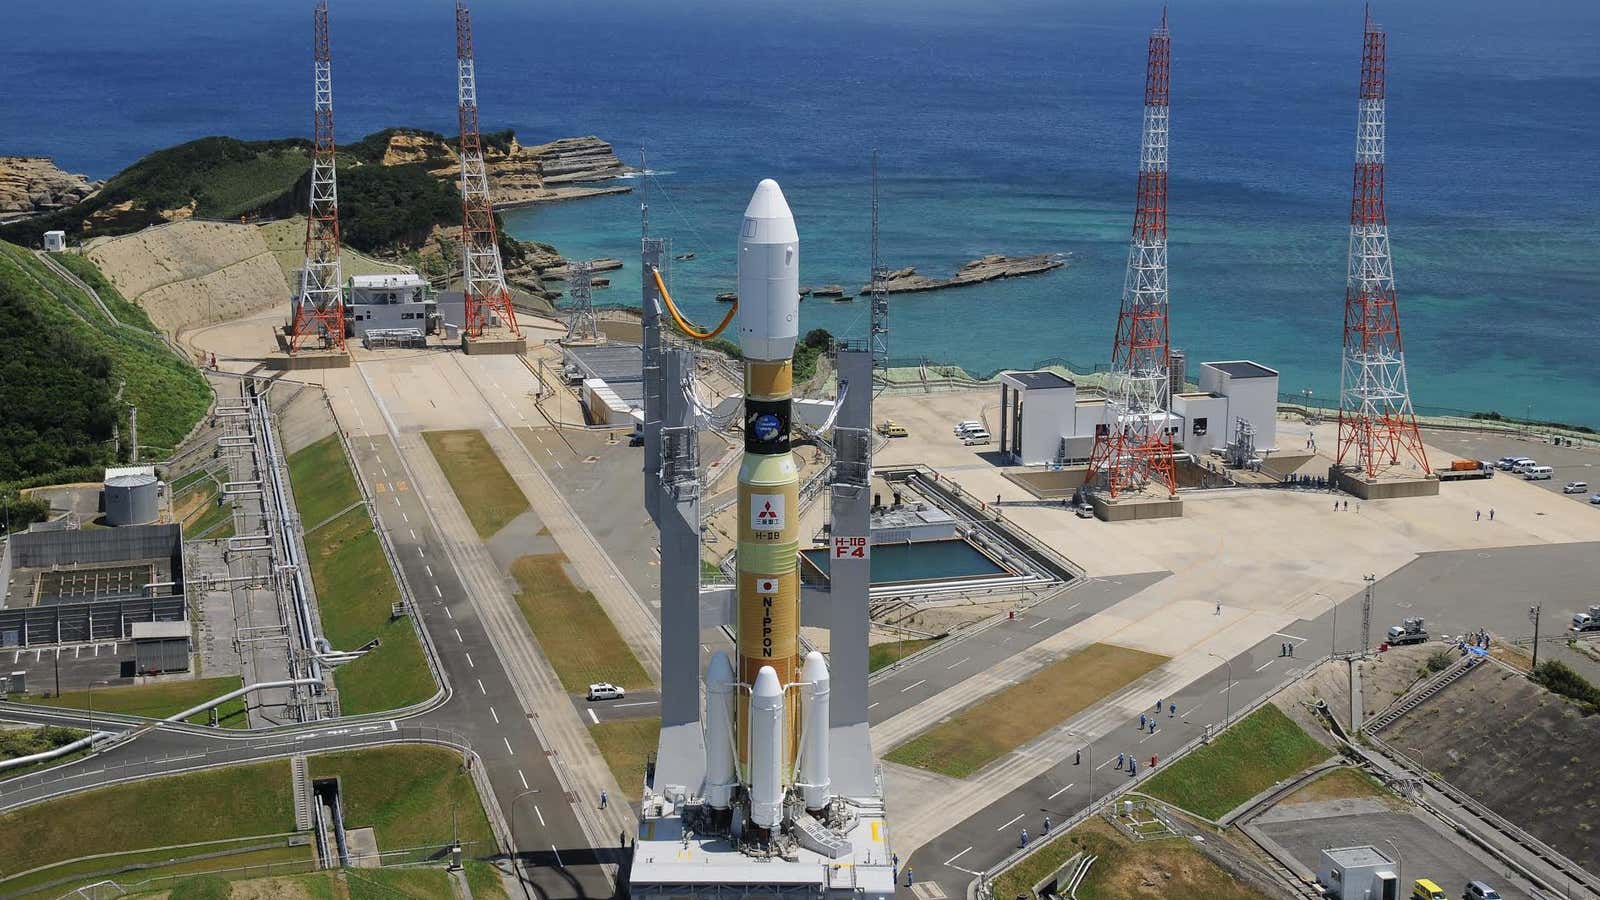 Carrying supplies for the International Space Station, the Kounotori “White Stork” prepares to launch.